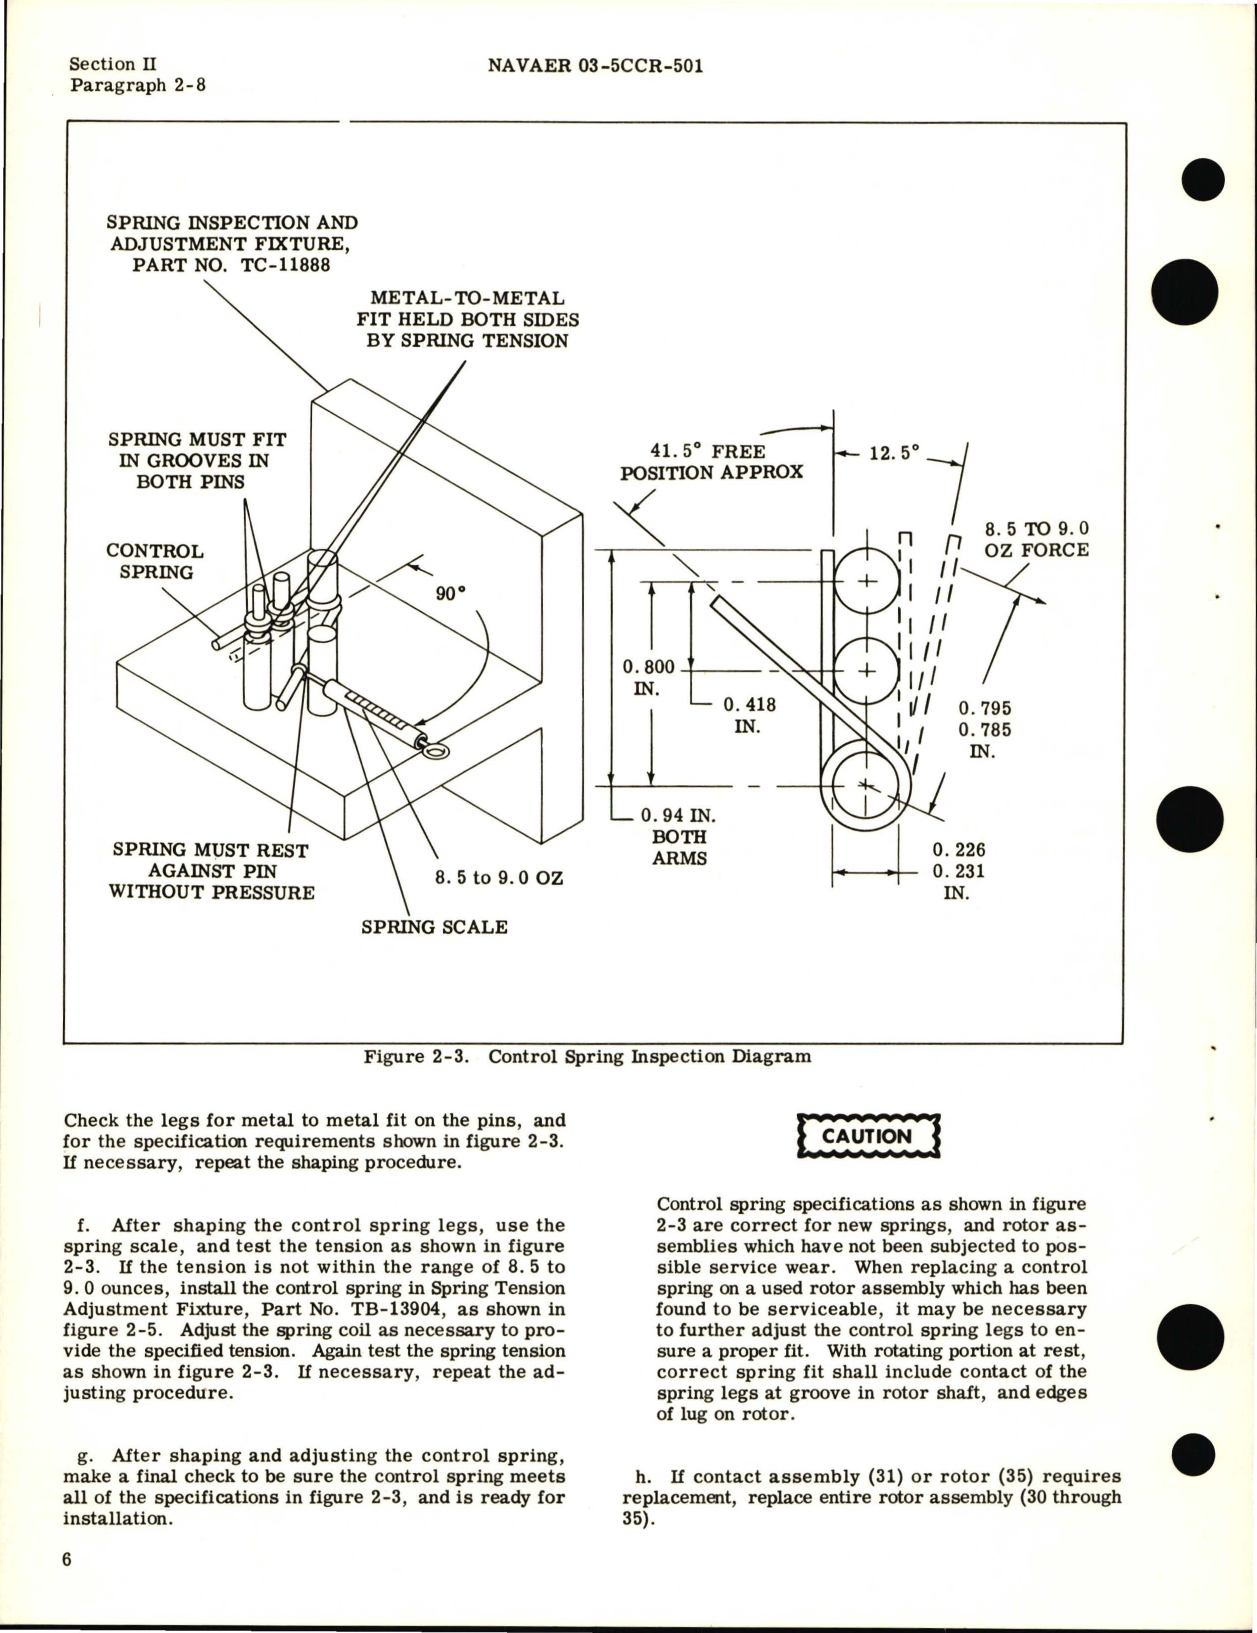 Sample page 8 from AirCorps Library document: Overhaul Instructions for Skid and Locked Wheel Detector Assemblies - 5823 Part Series